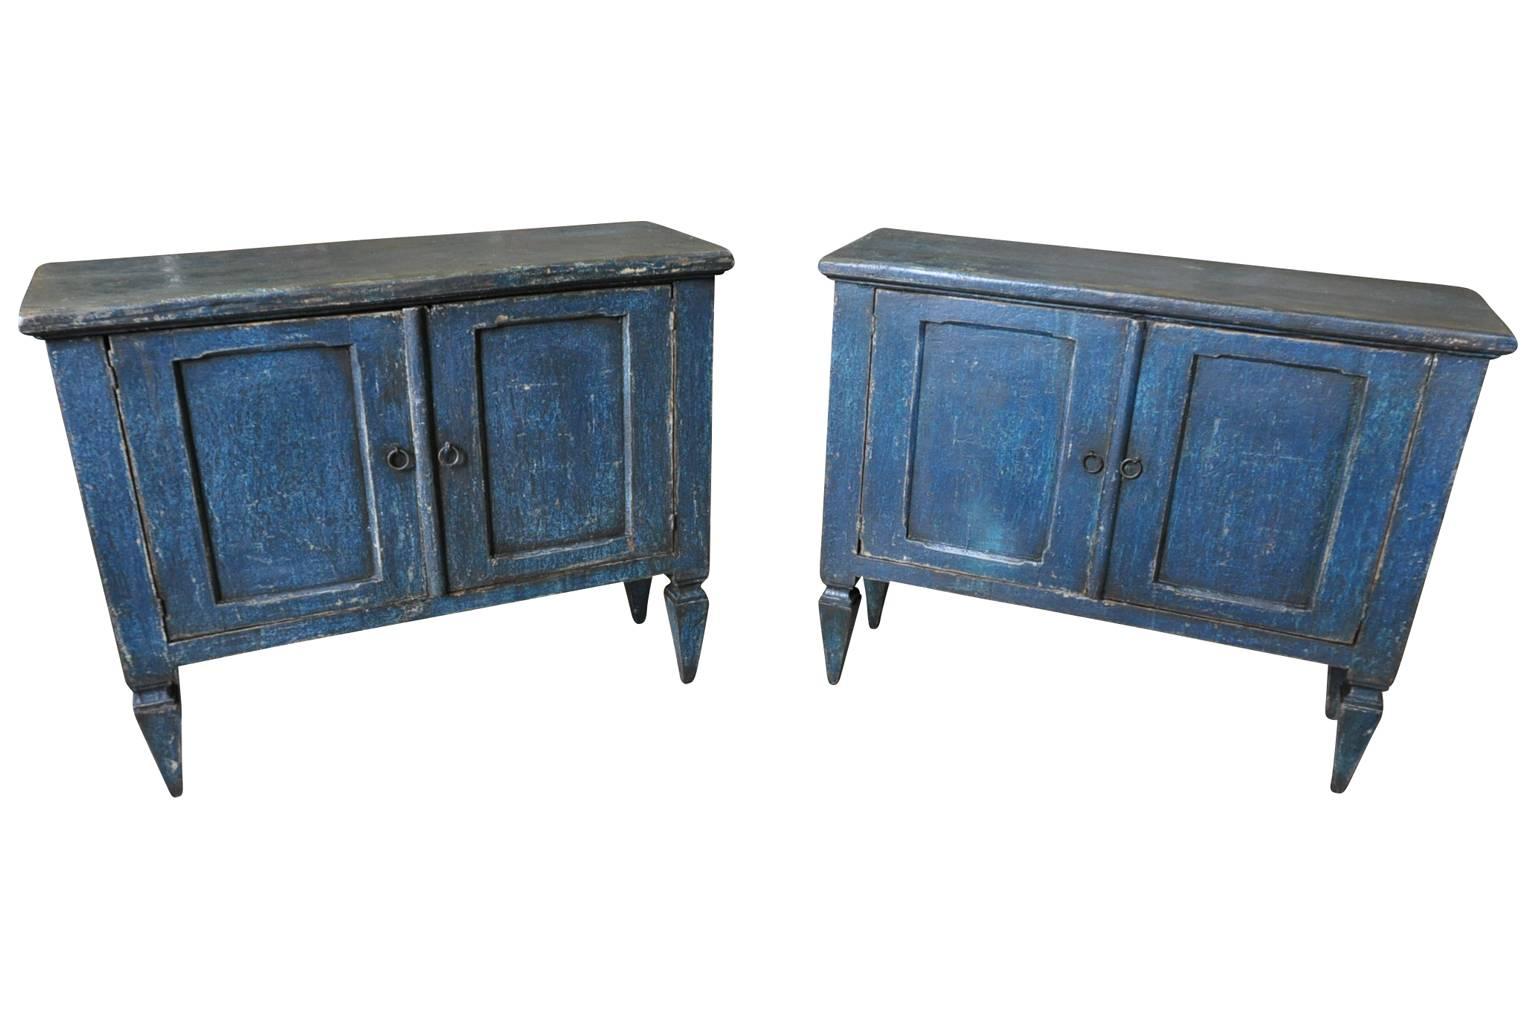 A terrific pair of later 19th century two-door buffets from the Catalan region of Spain. Beautifully constructed from painted wood with two paneled doors over nicely tapered legs.